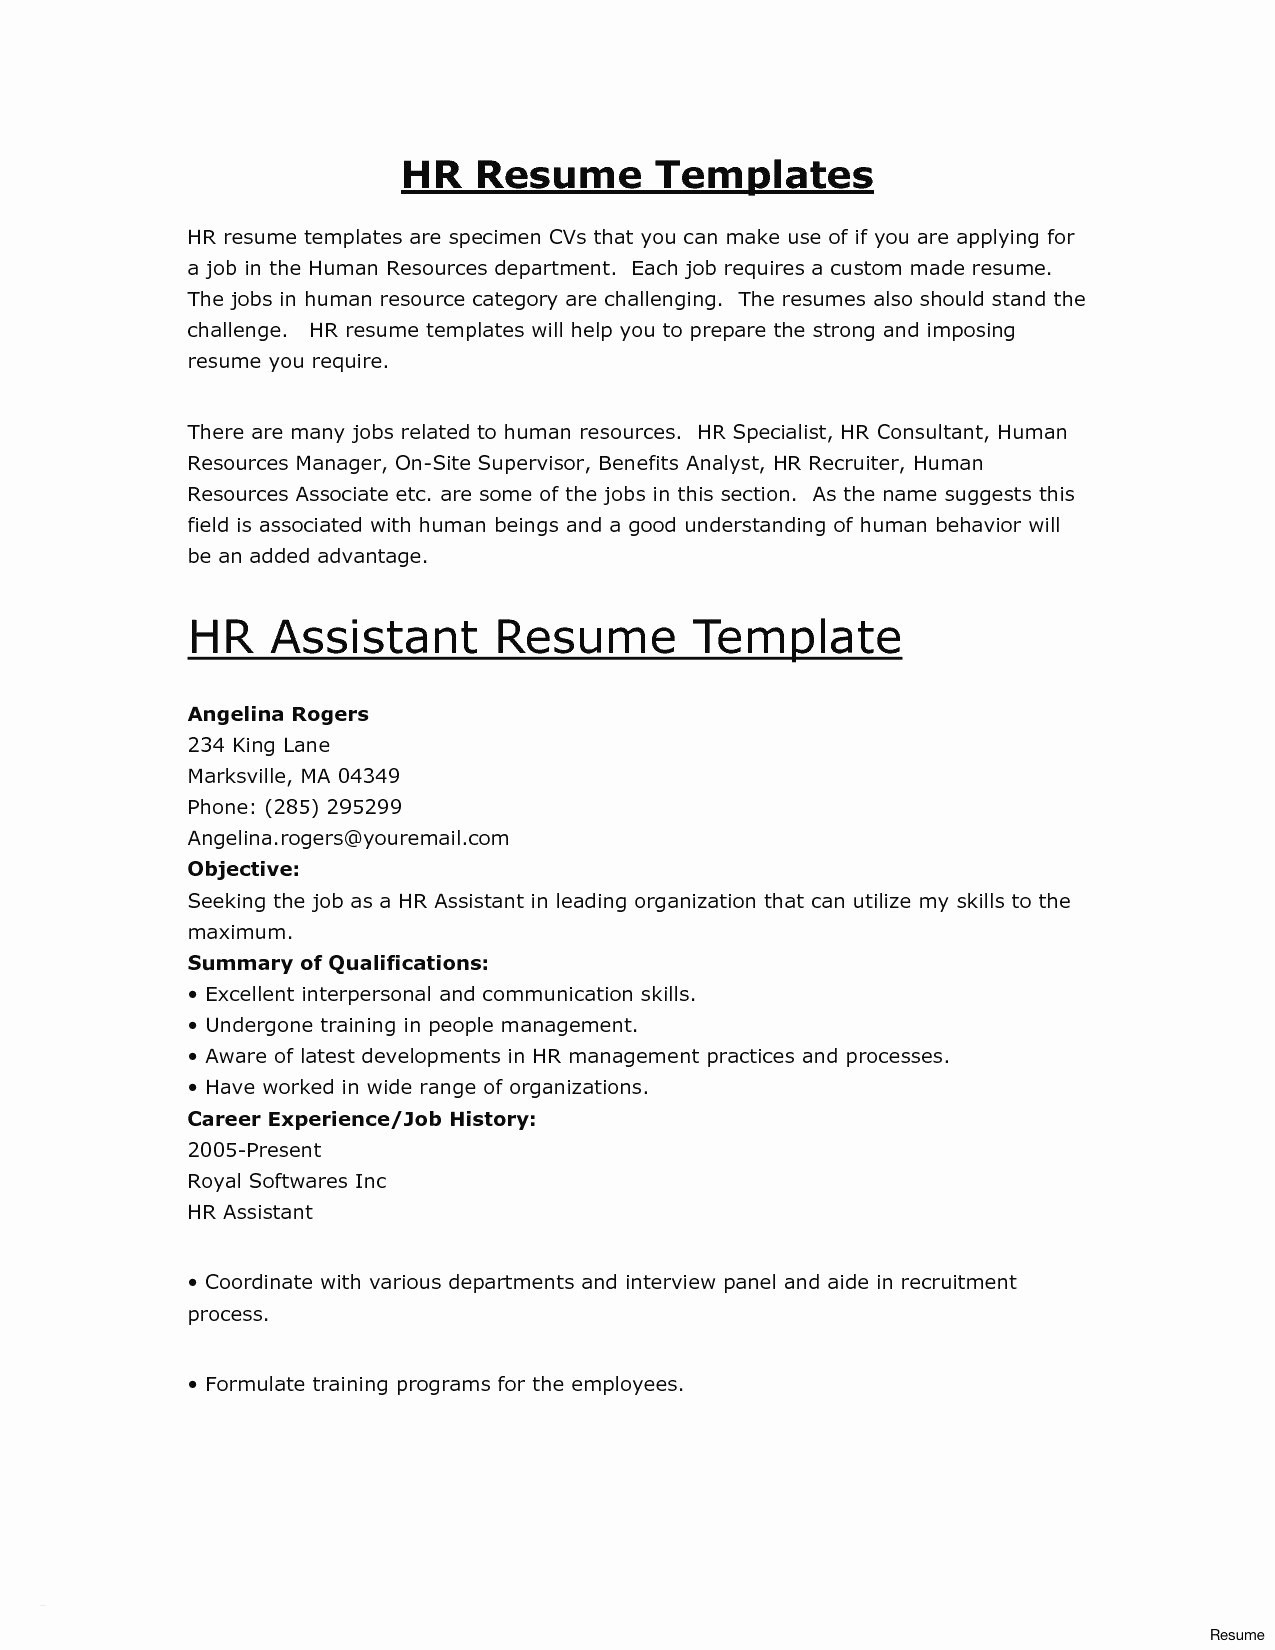 Resume Examples For Jobs Beautiful Resume Template With Picture Awesome About Me Examples Pdf What Makes A Great Of 8 resume examples for jobs|wikiresume.com